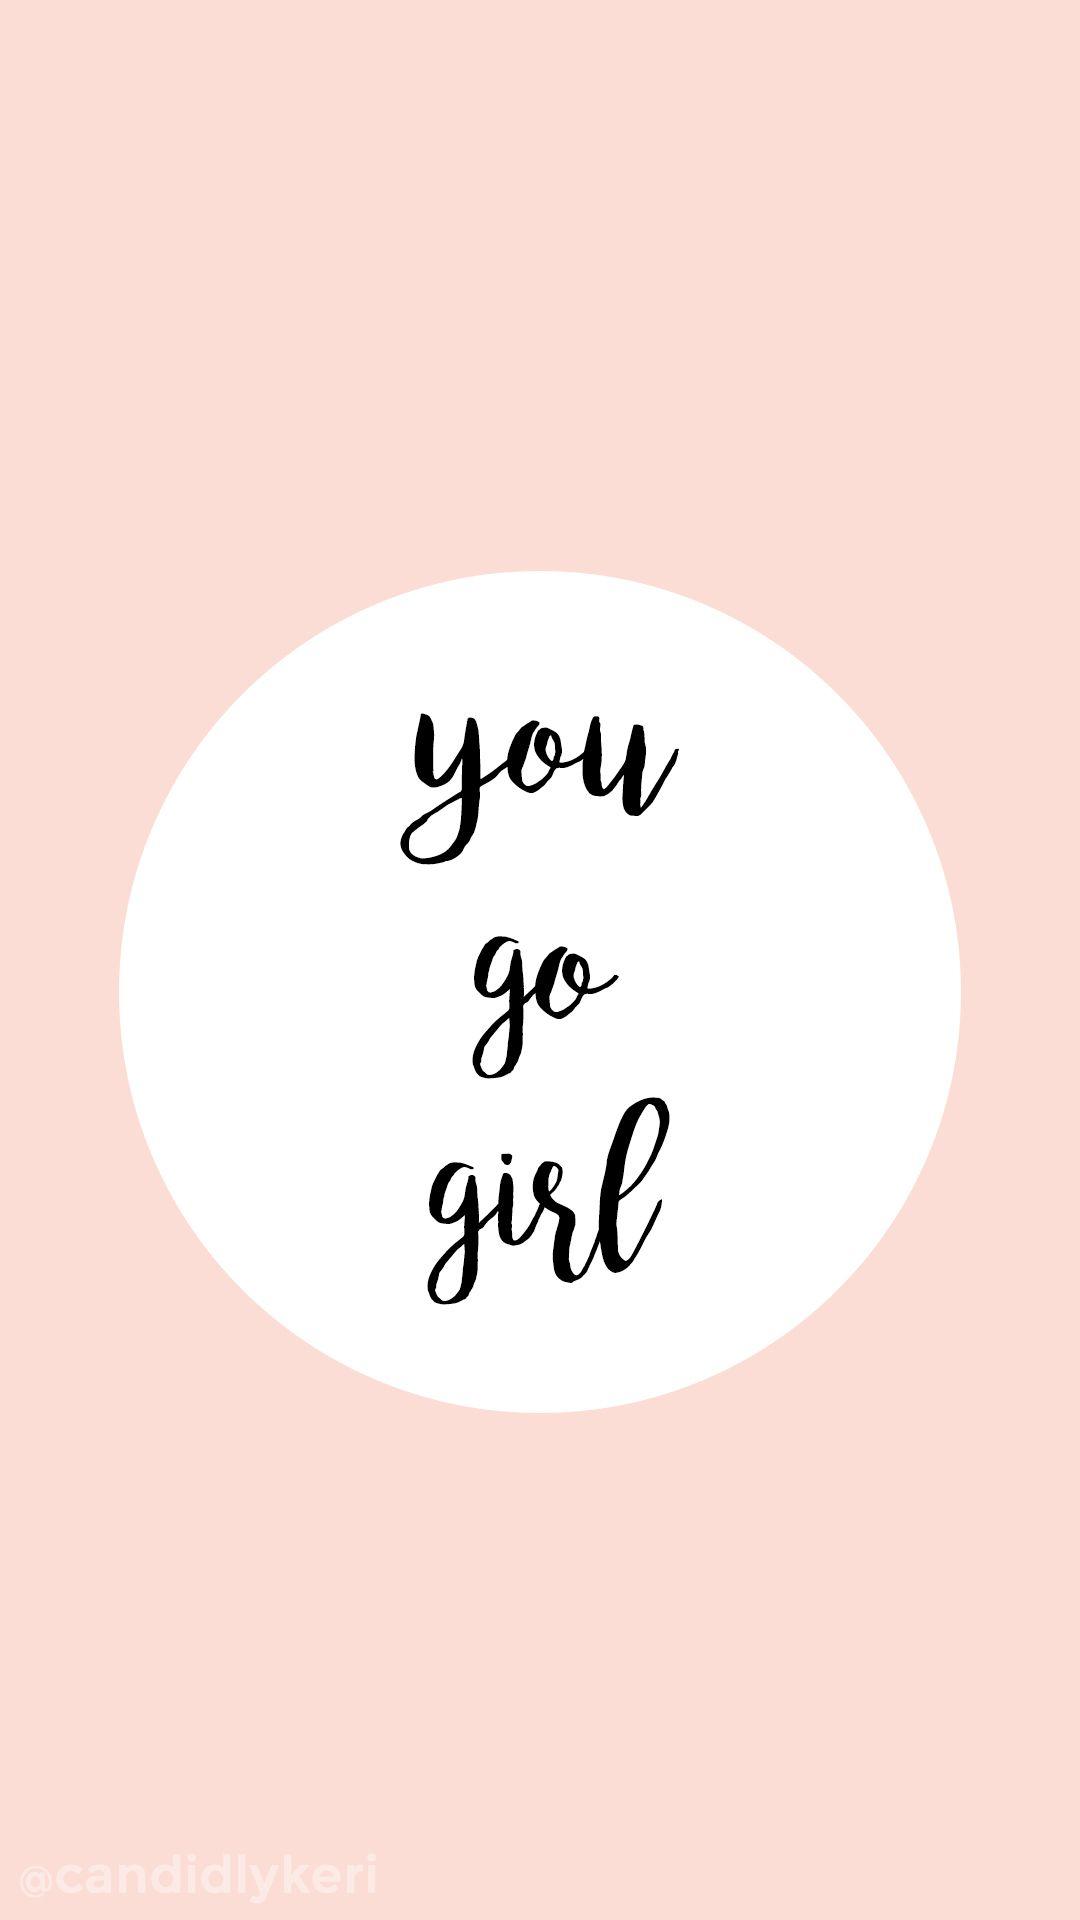 You Go Girl Pink quote inspirational background wallpaper you can download for free o. Girl iphone wallpaper, Inspirational background, Wallpaper iphone quotes